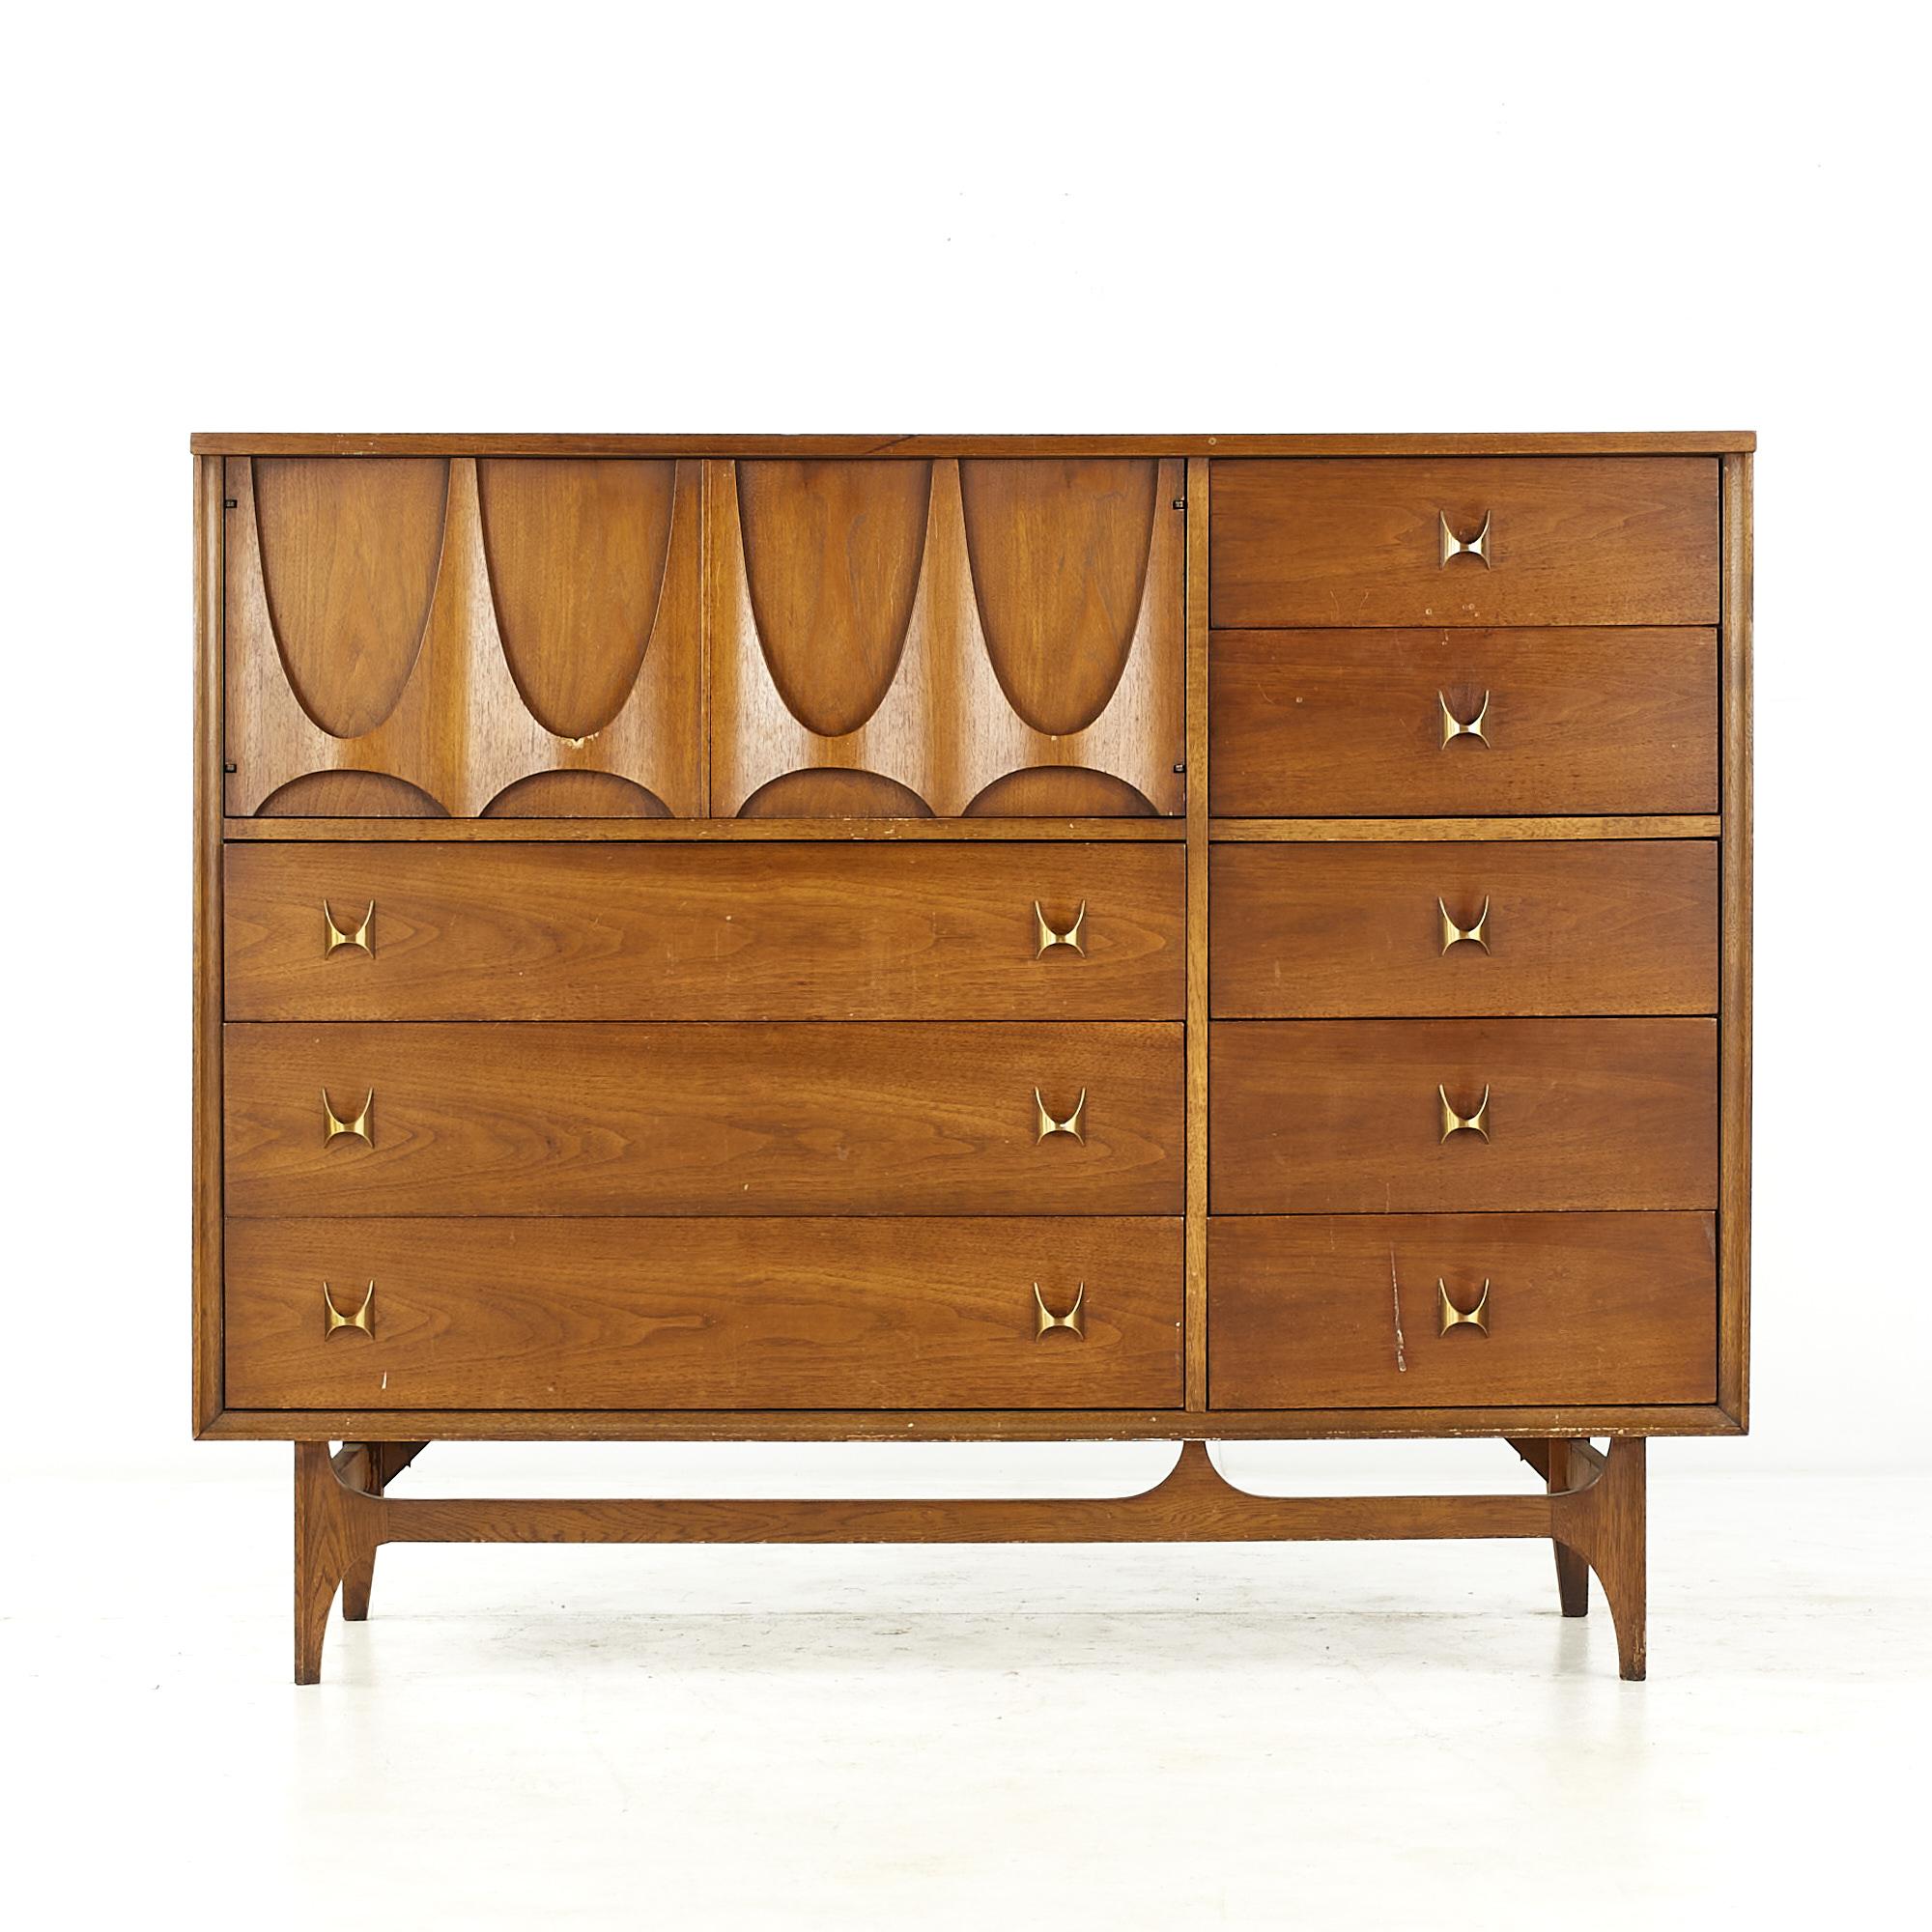 Broyhill Brasilia Mid Century walnut magna dresser

This dresser measures: 54 wide x 19 deep x 43.25 inches high

All pieces of furniture can be had in what we call restored vintage condition. That means the piece is restored upon purchase so